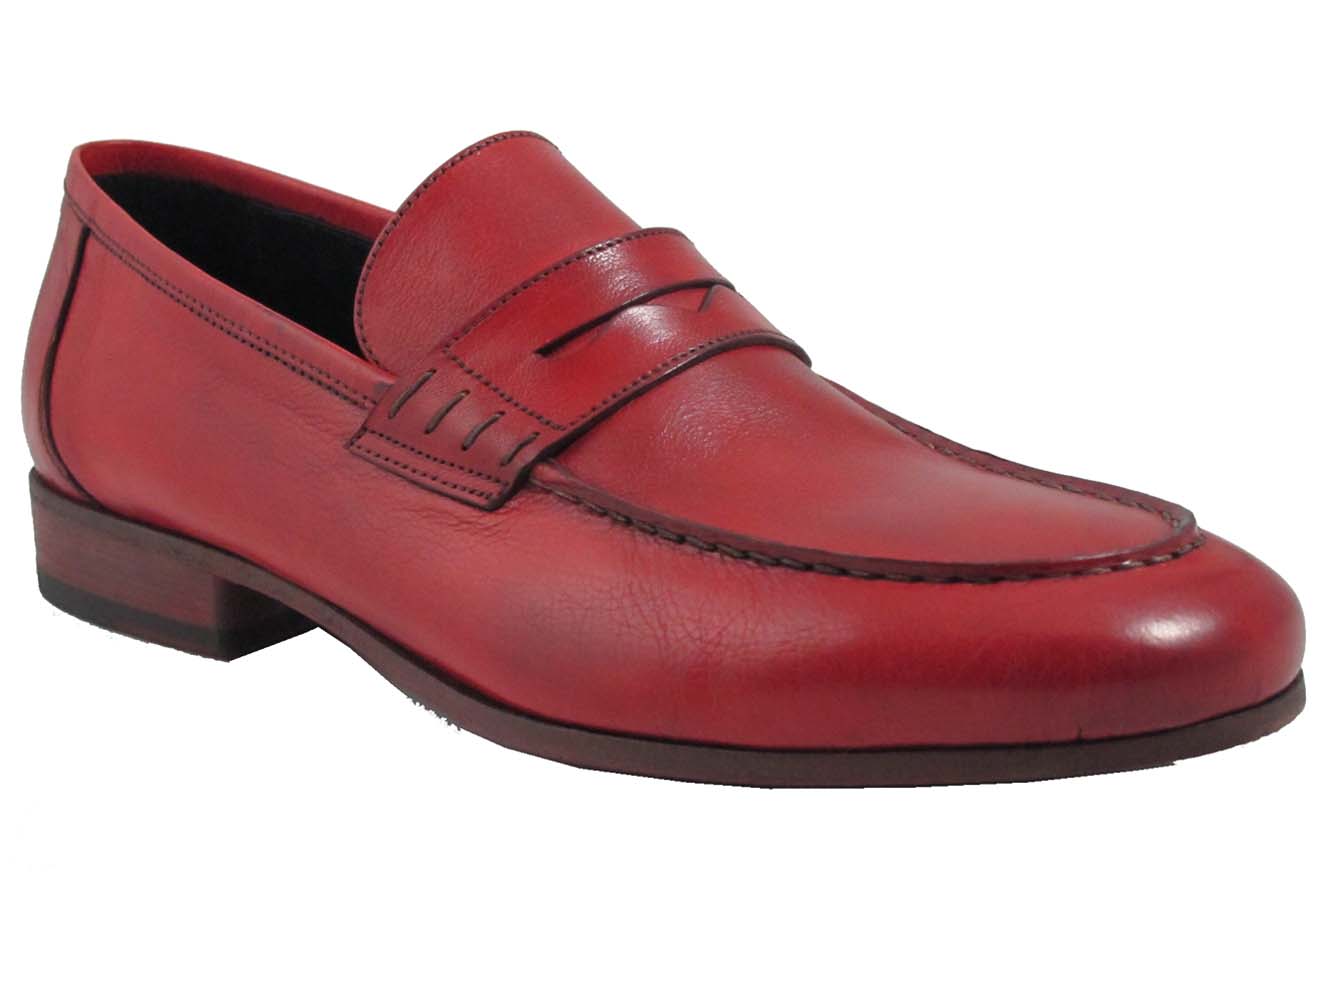 rossi-1876-loafers-shoes-red-main.jpg